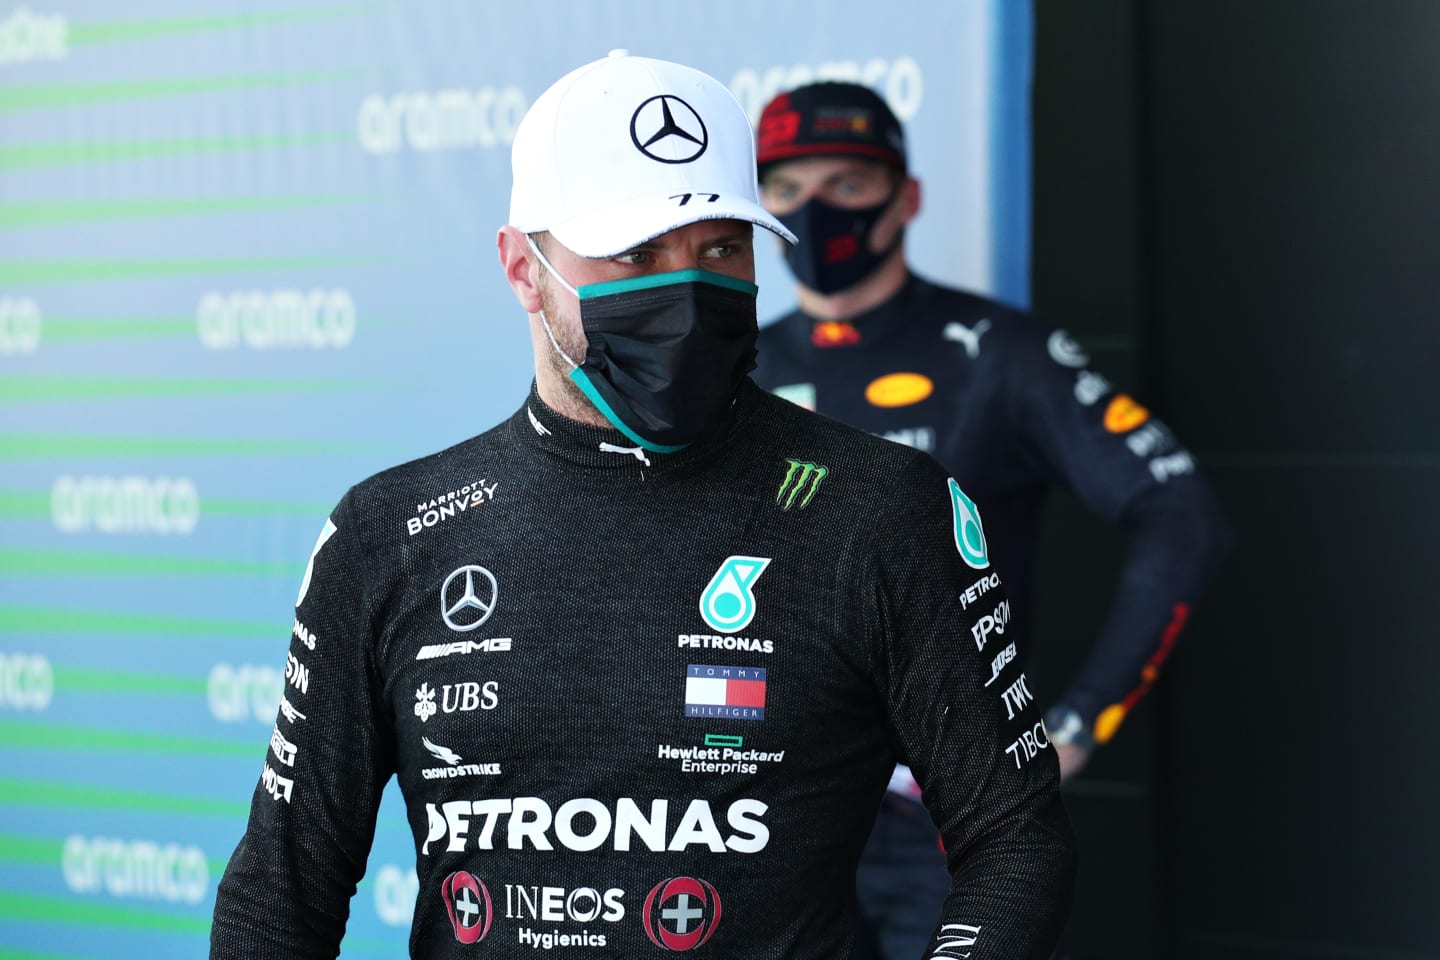 BARCELONA, SPAIN - AUGUST 15: Second placed qualifier Valtteri Bottas of Finland and Mercedes GP looks on during qualifying for the F1 Grand Prix of Spain at Circuit de Barcelona-Catalunya on August 15, 2020 in Barcelona, Spain. (Photo by Albert Gea/Pool via Getty Images)